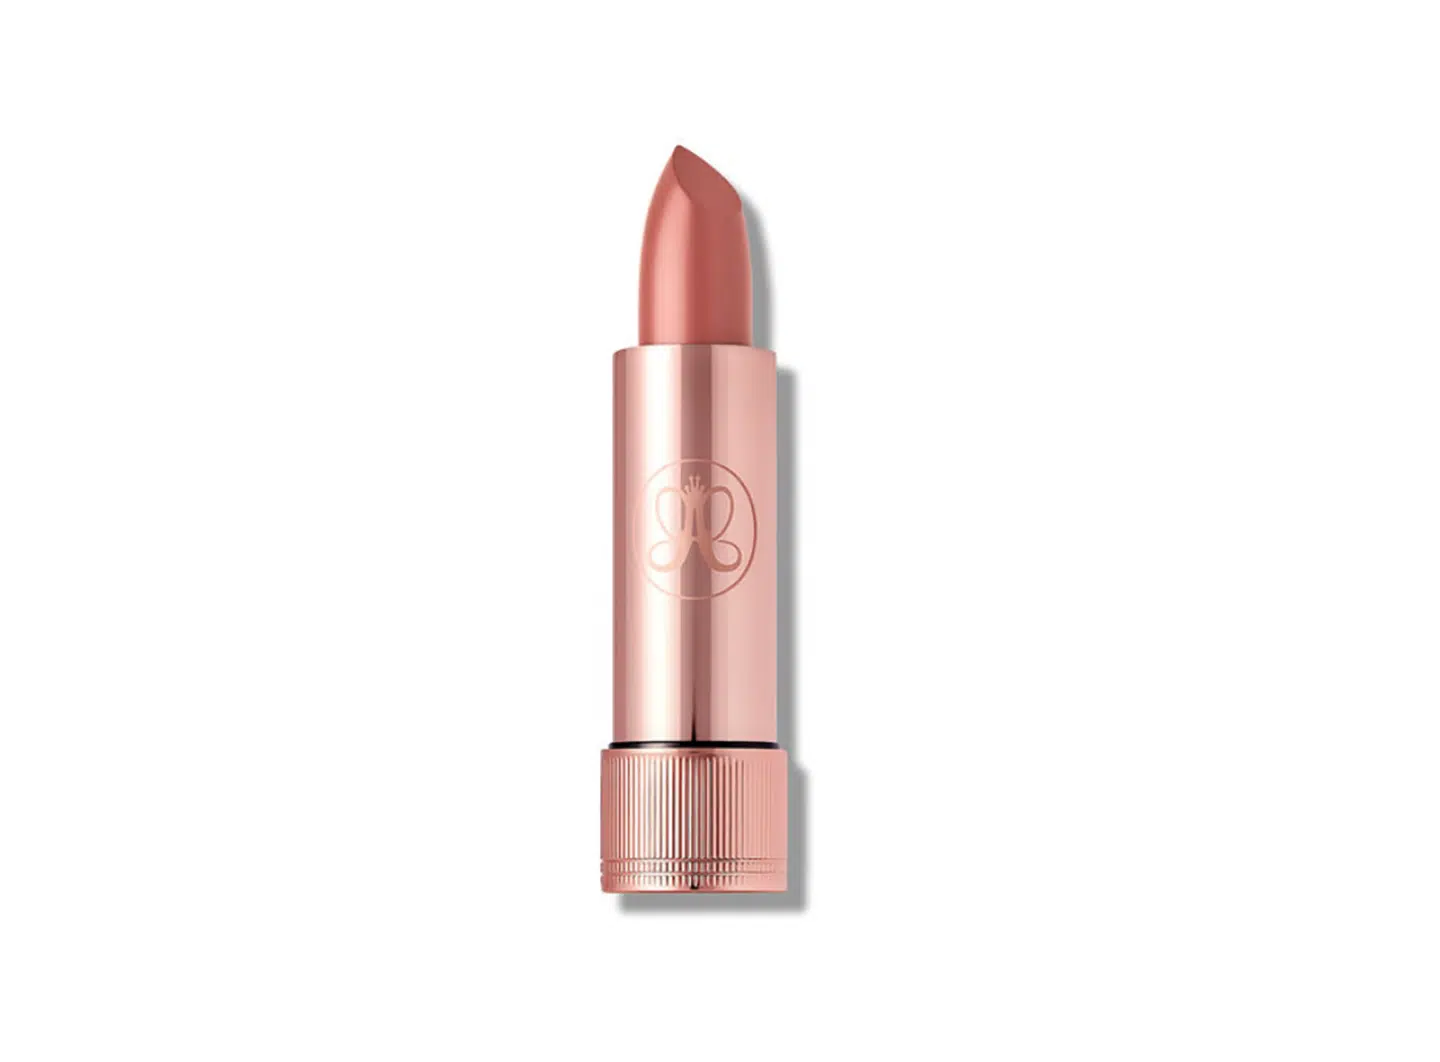 Best Charlotte Tilbury Pillow Talk dupe, by beauty blogger What The Fab